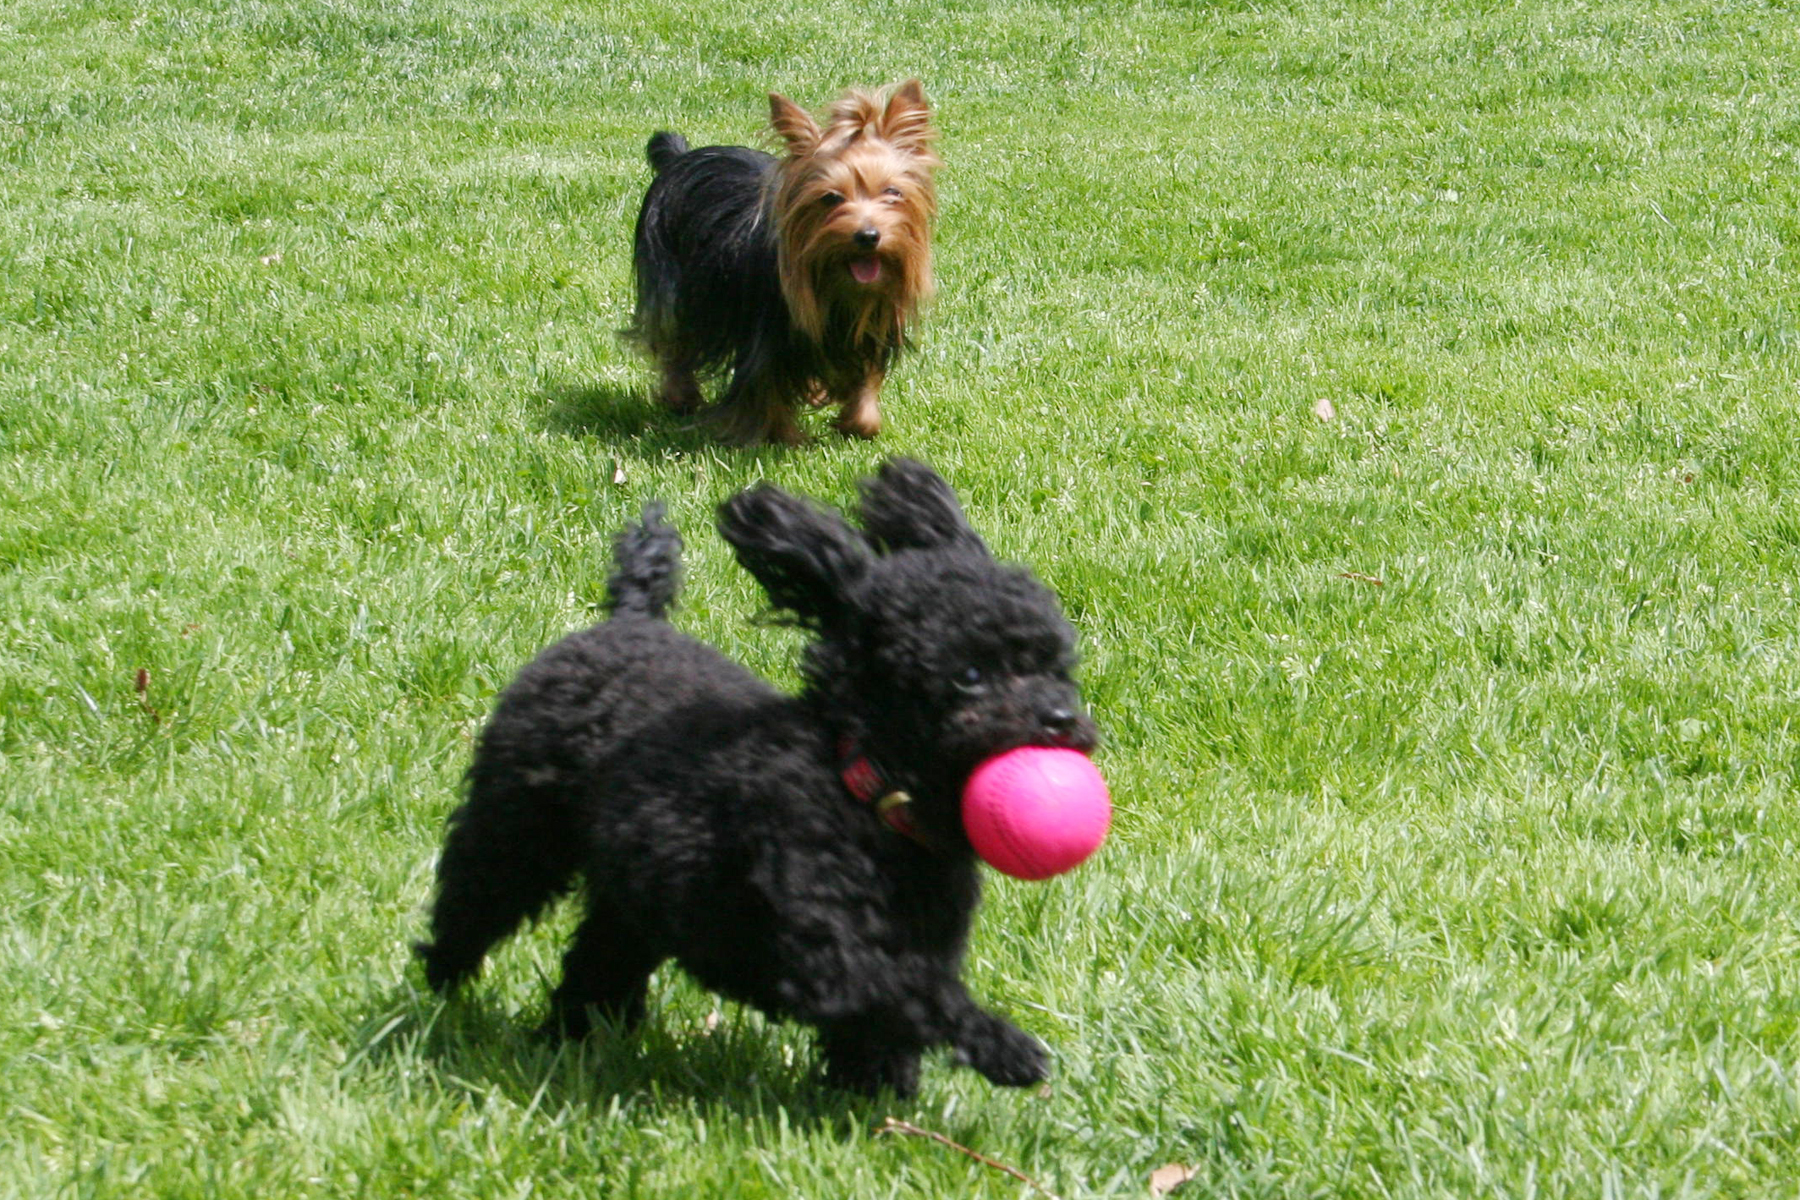 Two dogs run through the part with a pink ball